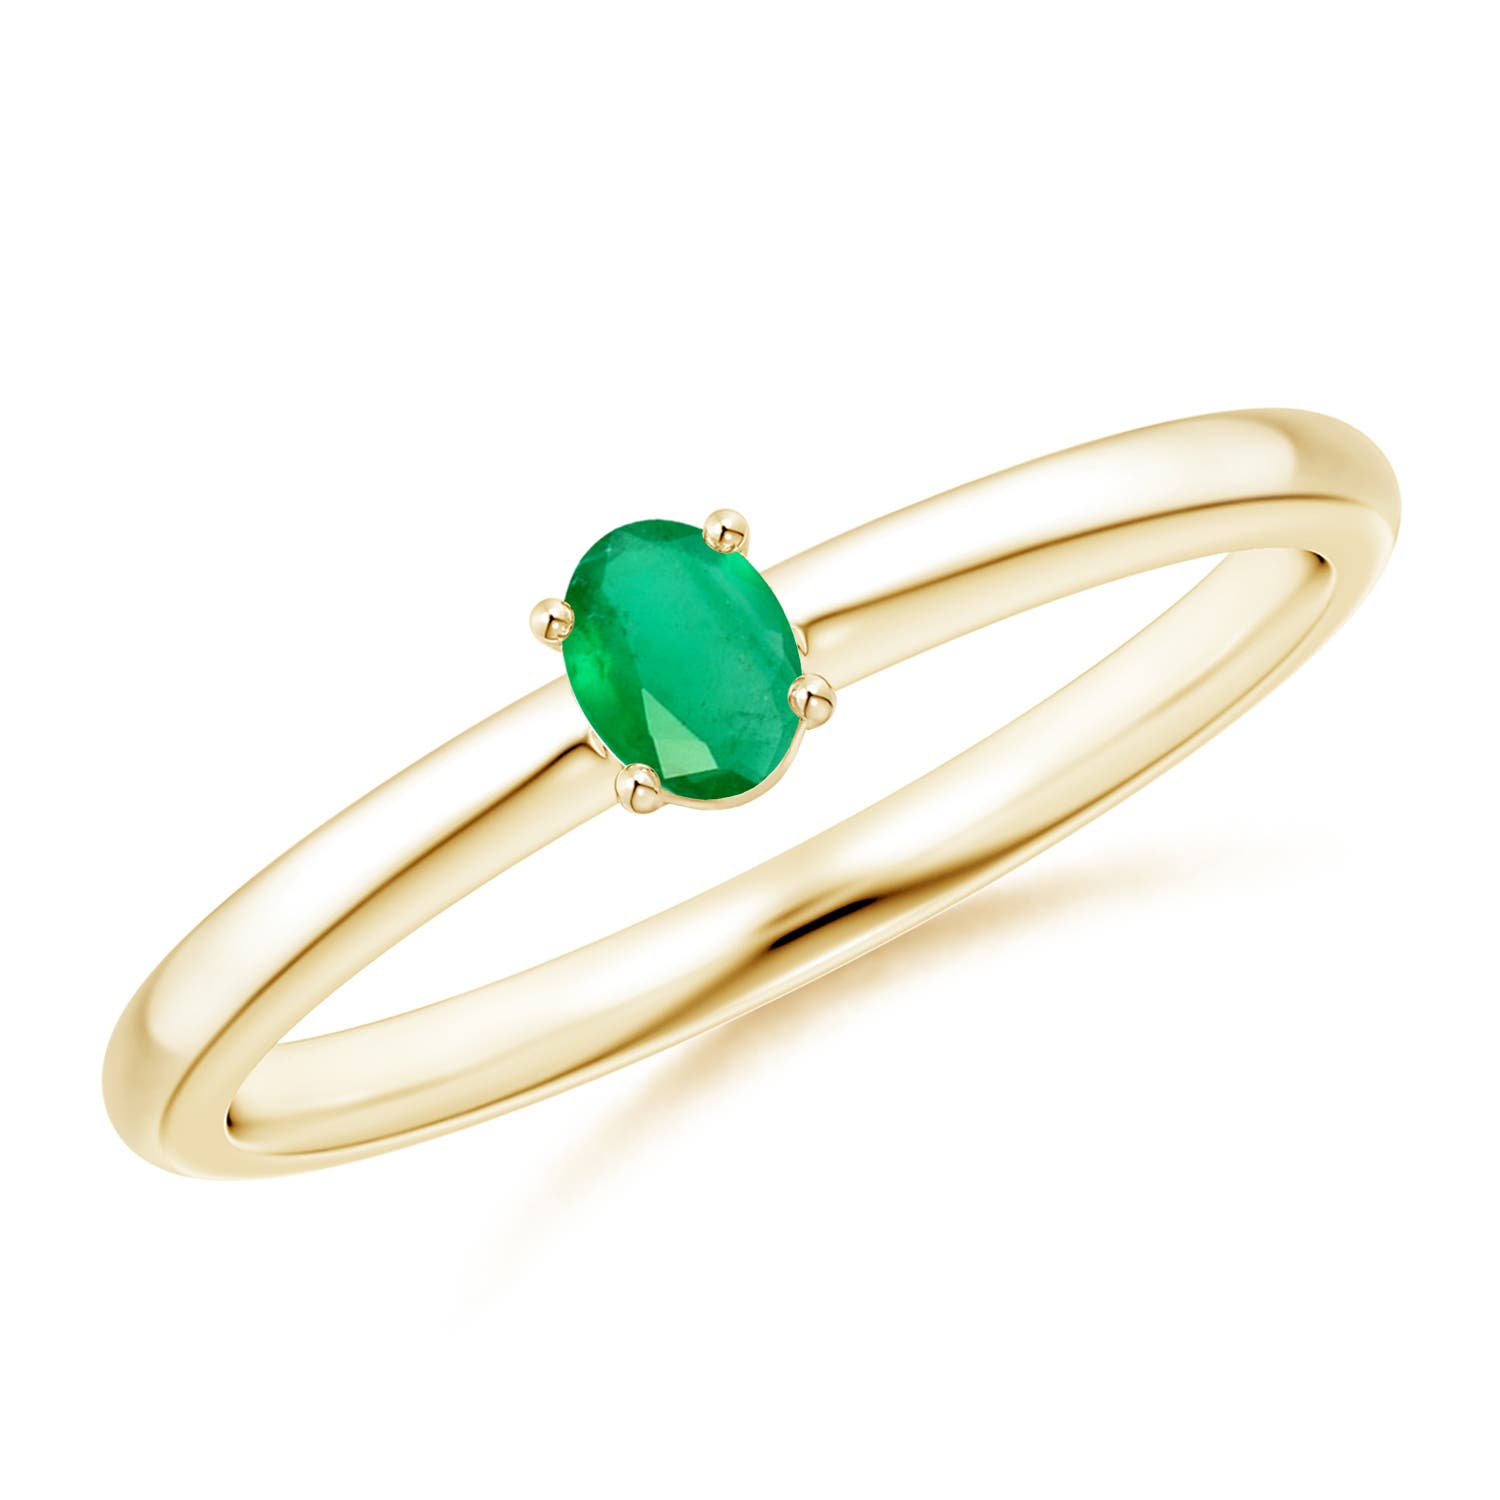 A - Emerald / 0.12 CT / 14 KT Yellow Gold